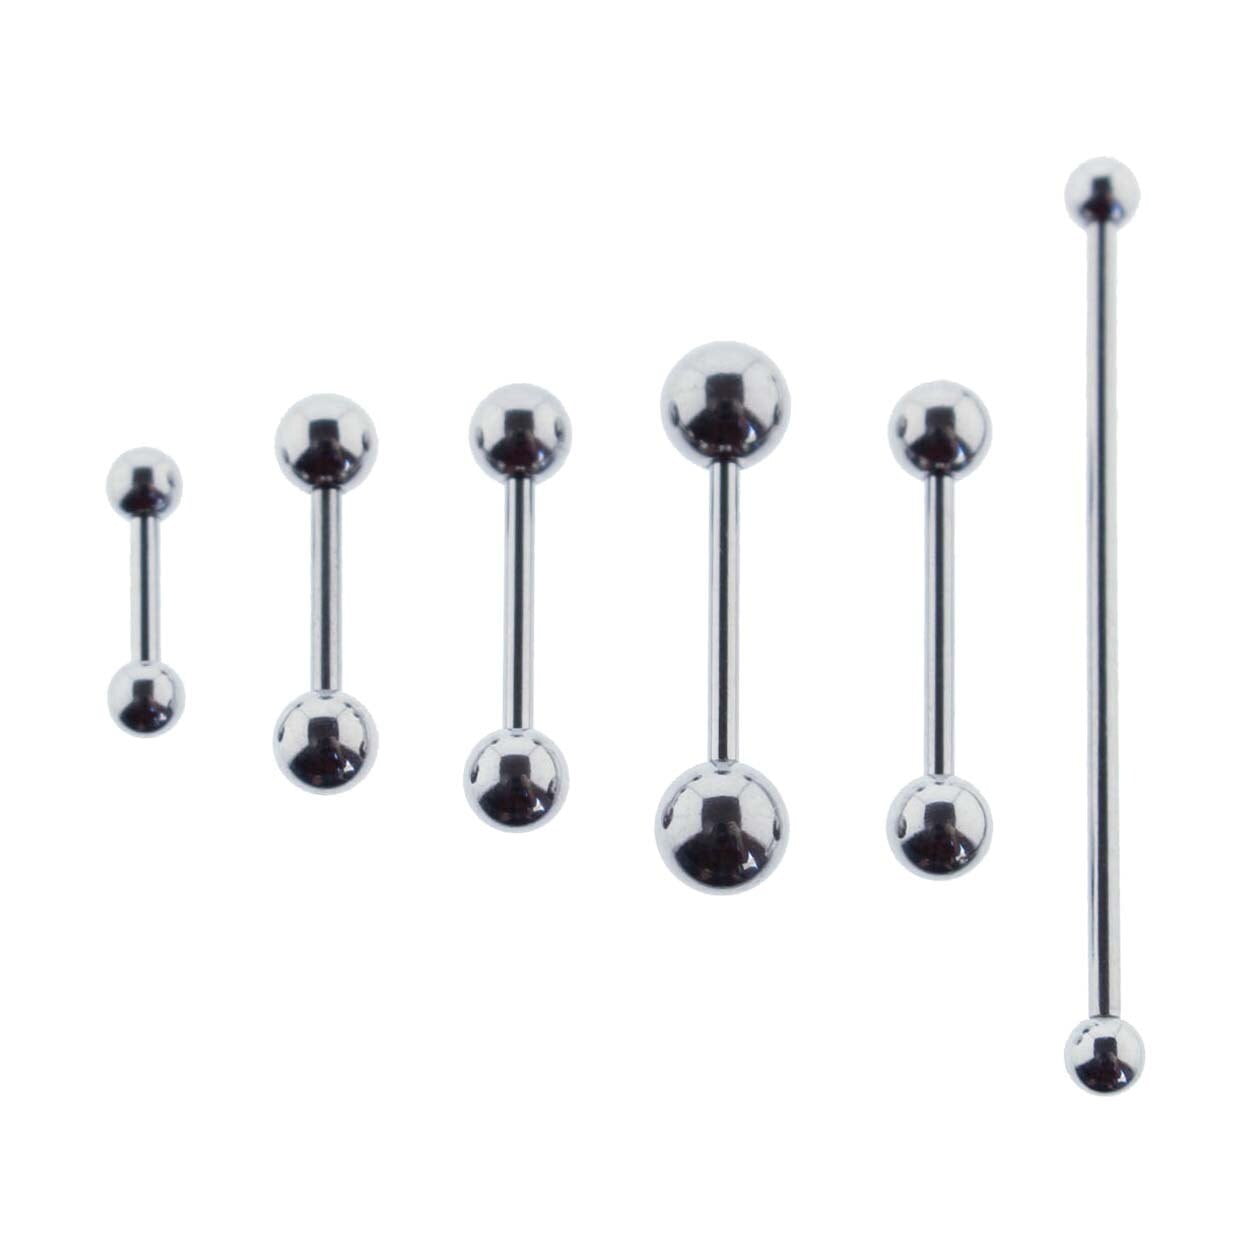 Piercing Jewelry Tongue Rod Barbell 1,6mm Black with One 4mm Zirconia Ball